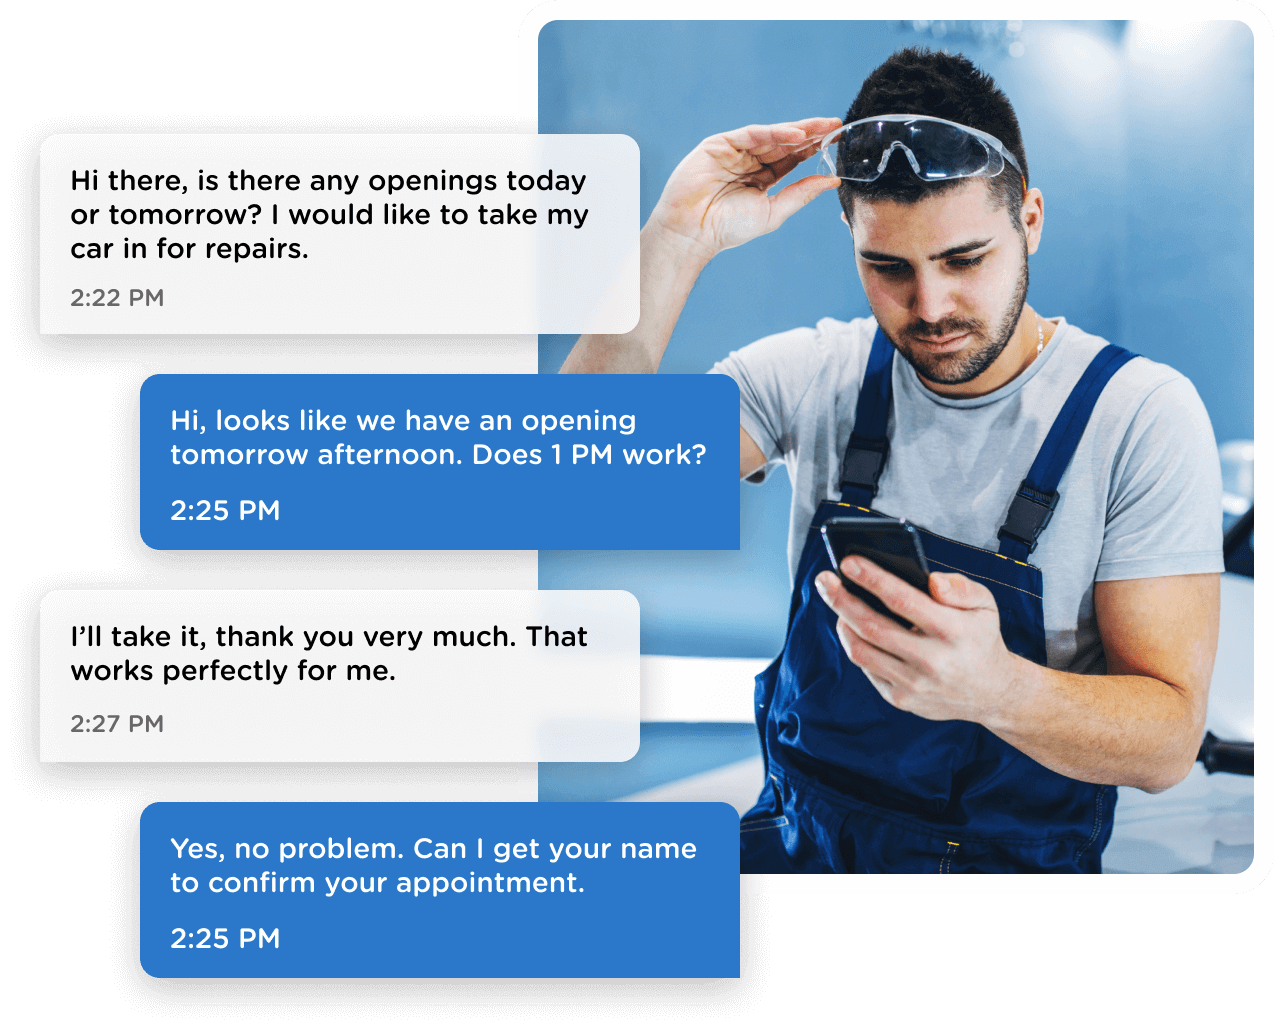 WIth LocalMessages, you can keep customer engagement high by instantly responding to customer inquiries via text message.